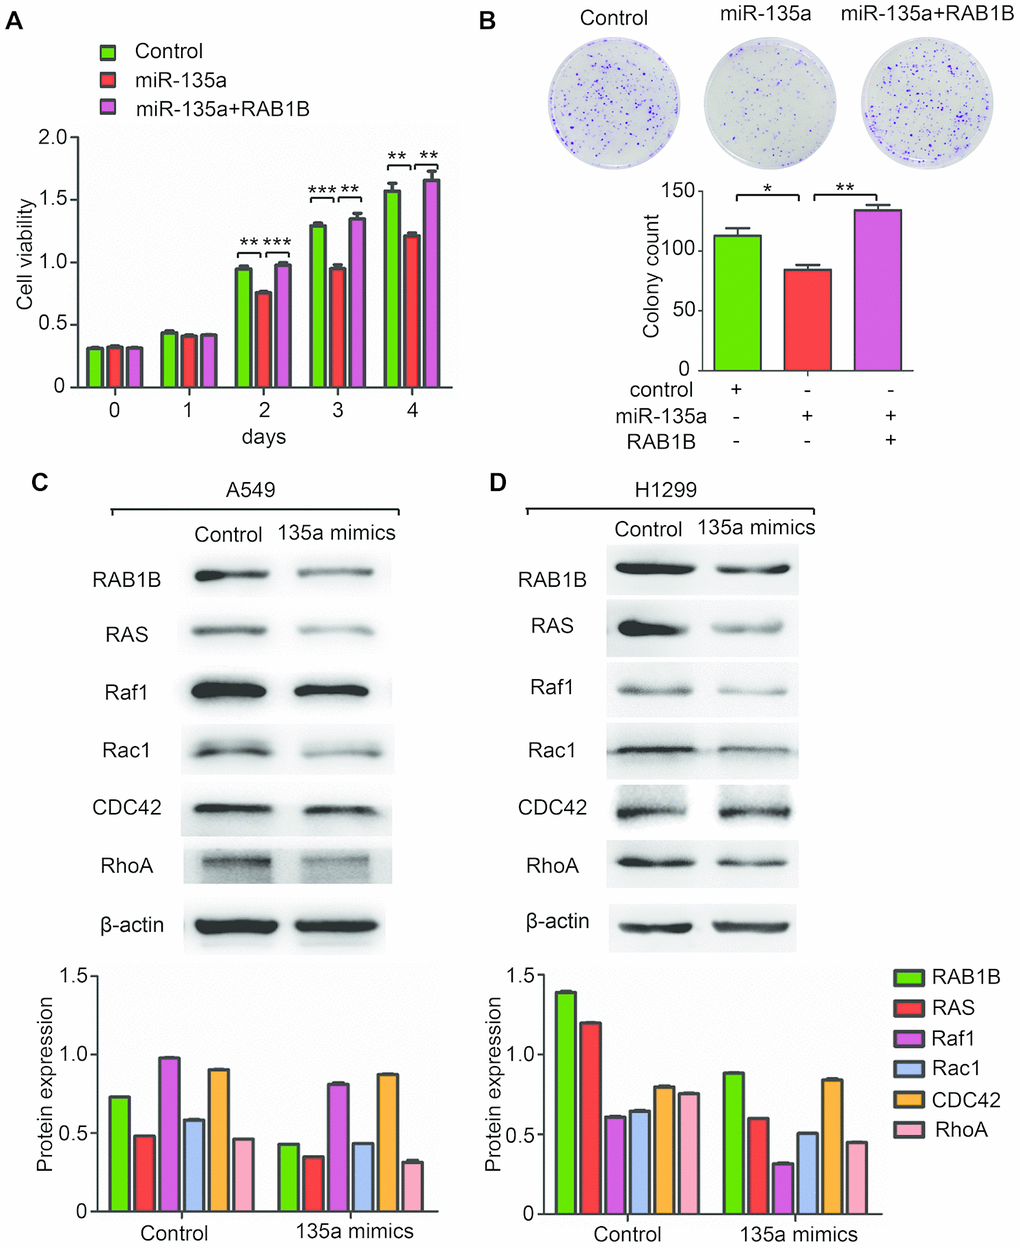 MiR-135a inhibits the expression of multiple components of the RAS pathway. (A, B) Overexpression of RAB1B antagonized the effects of miR-135a mimics on (A) cell viability and (B) colony forming ability. (C, D) Western blotting analysis of the RAB1B and RAS pathway components in (C) A549 and (D) H1299 cells transduced with miR-135a mimics. Due to the overall contrast adjustment, some parts are no background in figure 3C and 3D.